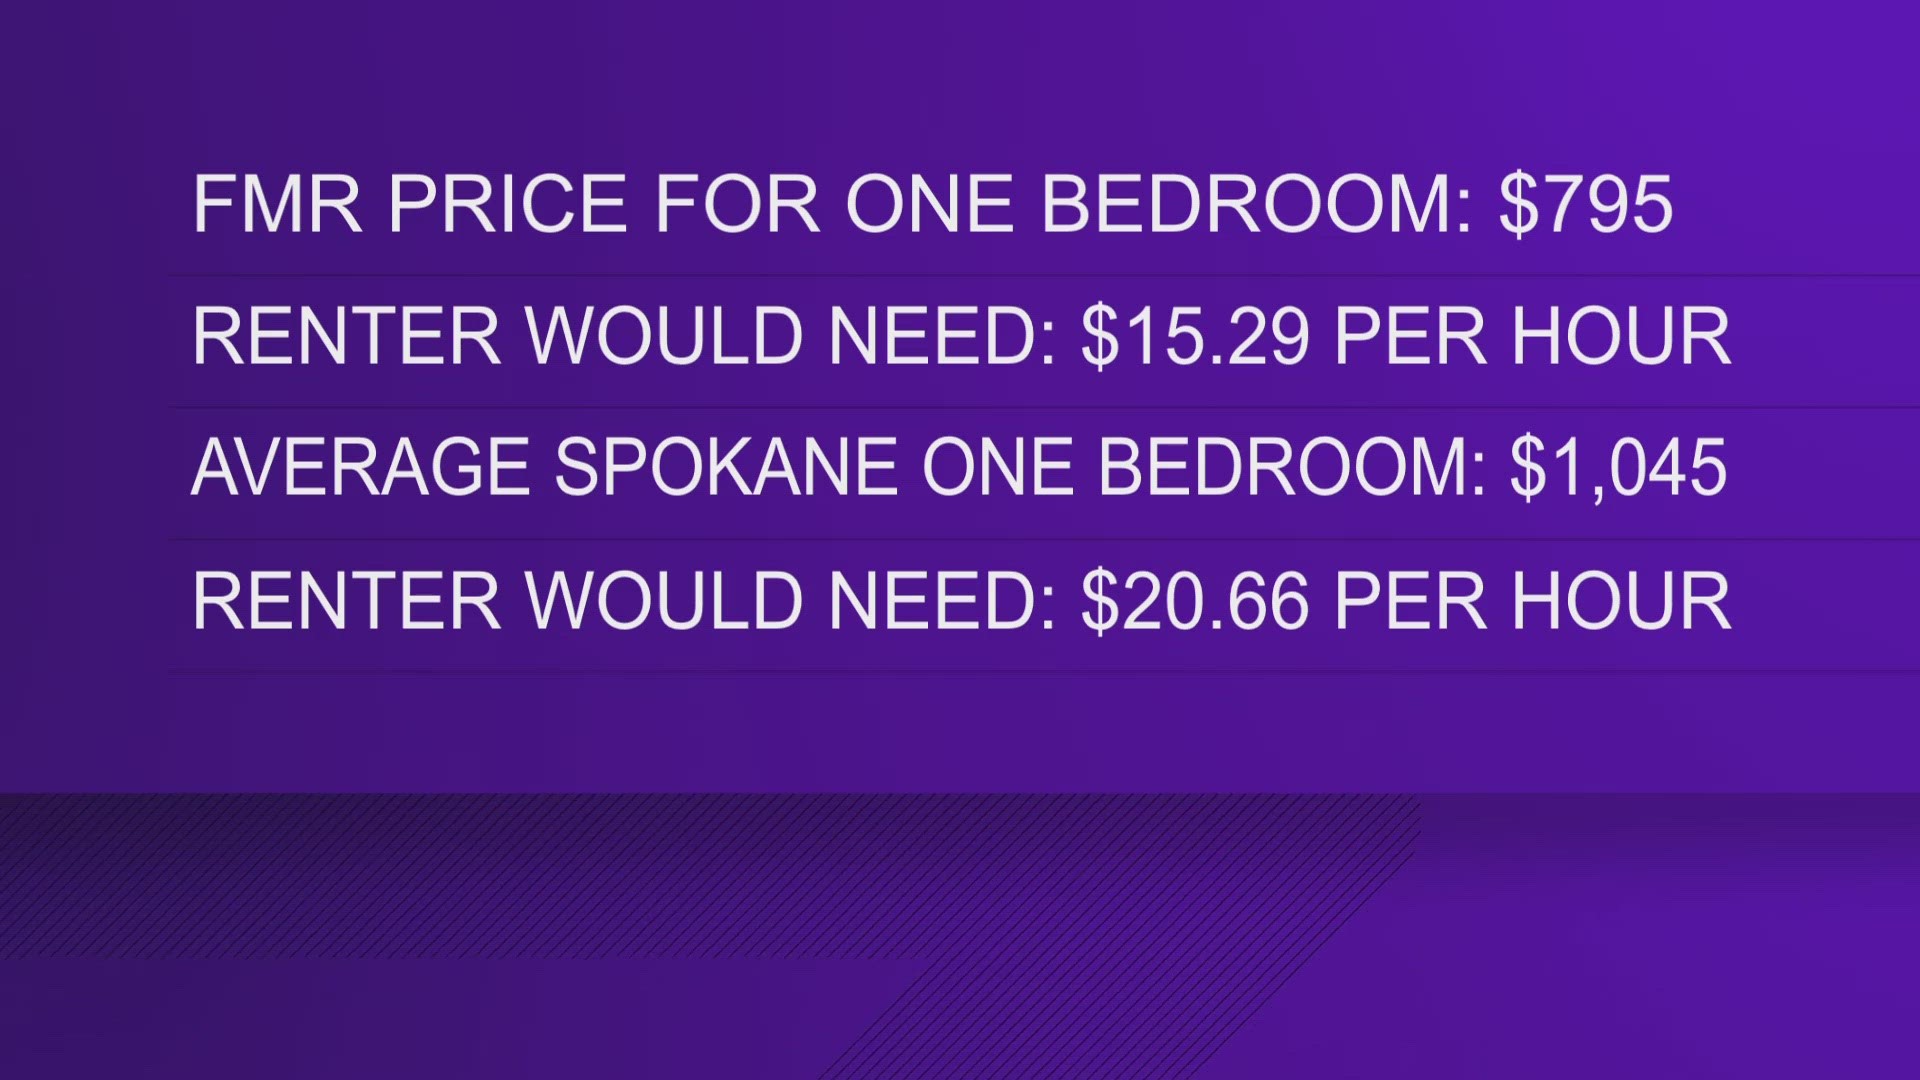 Although Washington has the second-highest minimum wage in the country, Spokane renters are having a hard time affording even a modest 1-bedroom apartment.